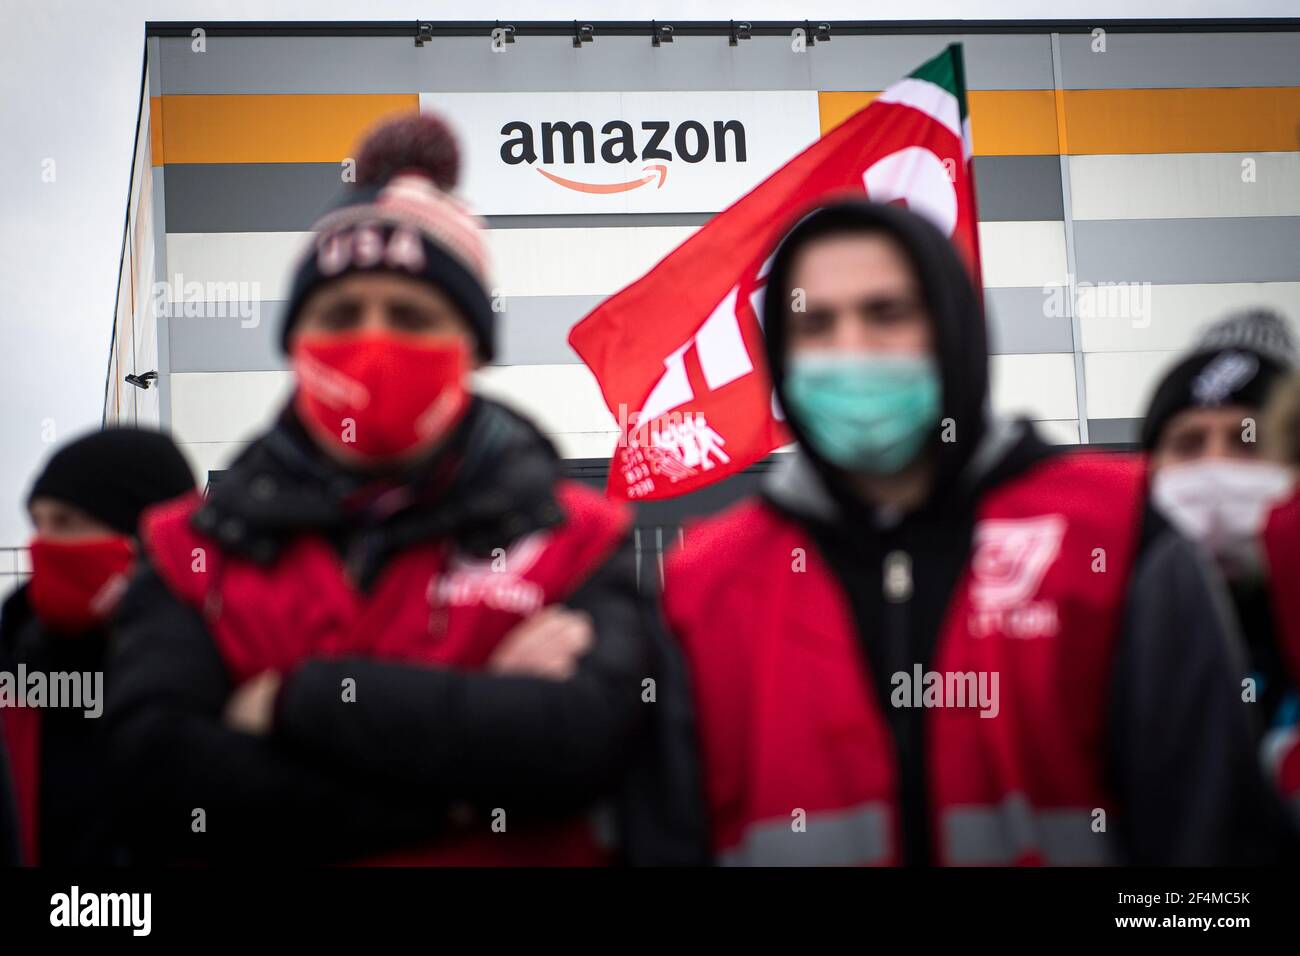 Brandizzo, Italy - 22 March, 2021: Amazon's logo and employees of 'Filt CGIL' trade union are seen during a demonstration for better working conditions in front of the Amazon distribution centre in Brandizzo. Trade unions said that 9,500 warehouse workers and 15,000 drivers were on strike in Italy. Credit: Nicolò Campo/Alamy Live News Stock Photo